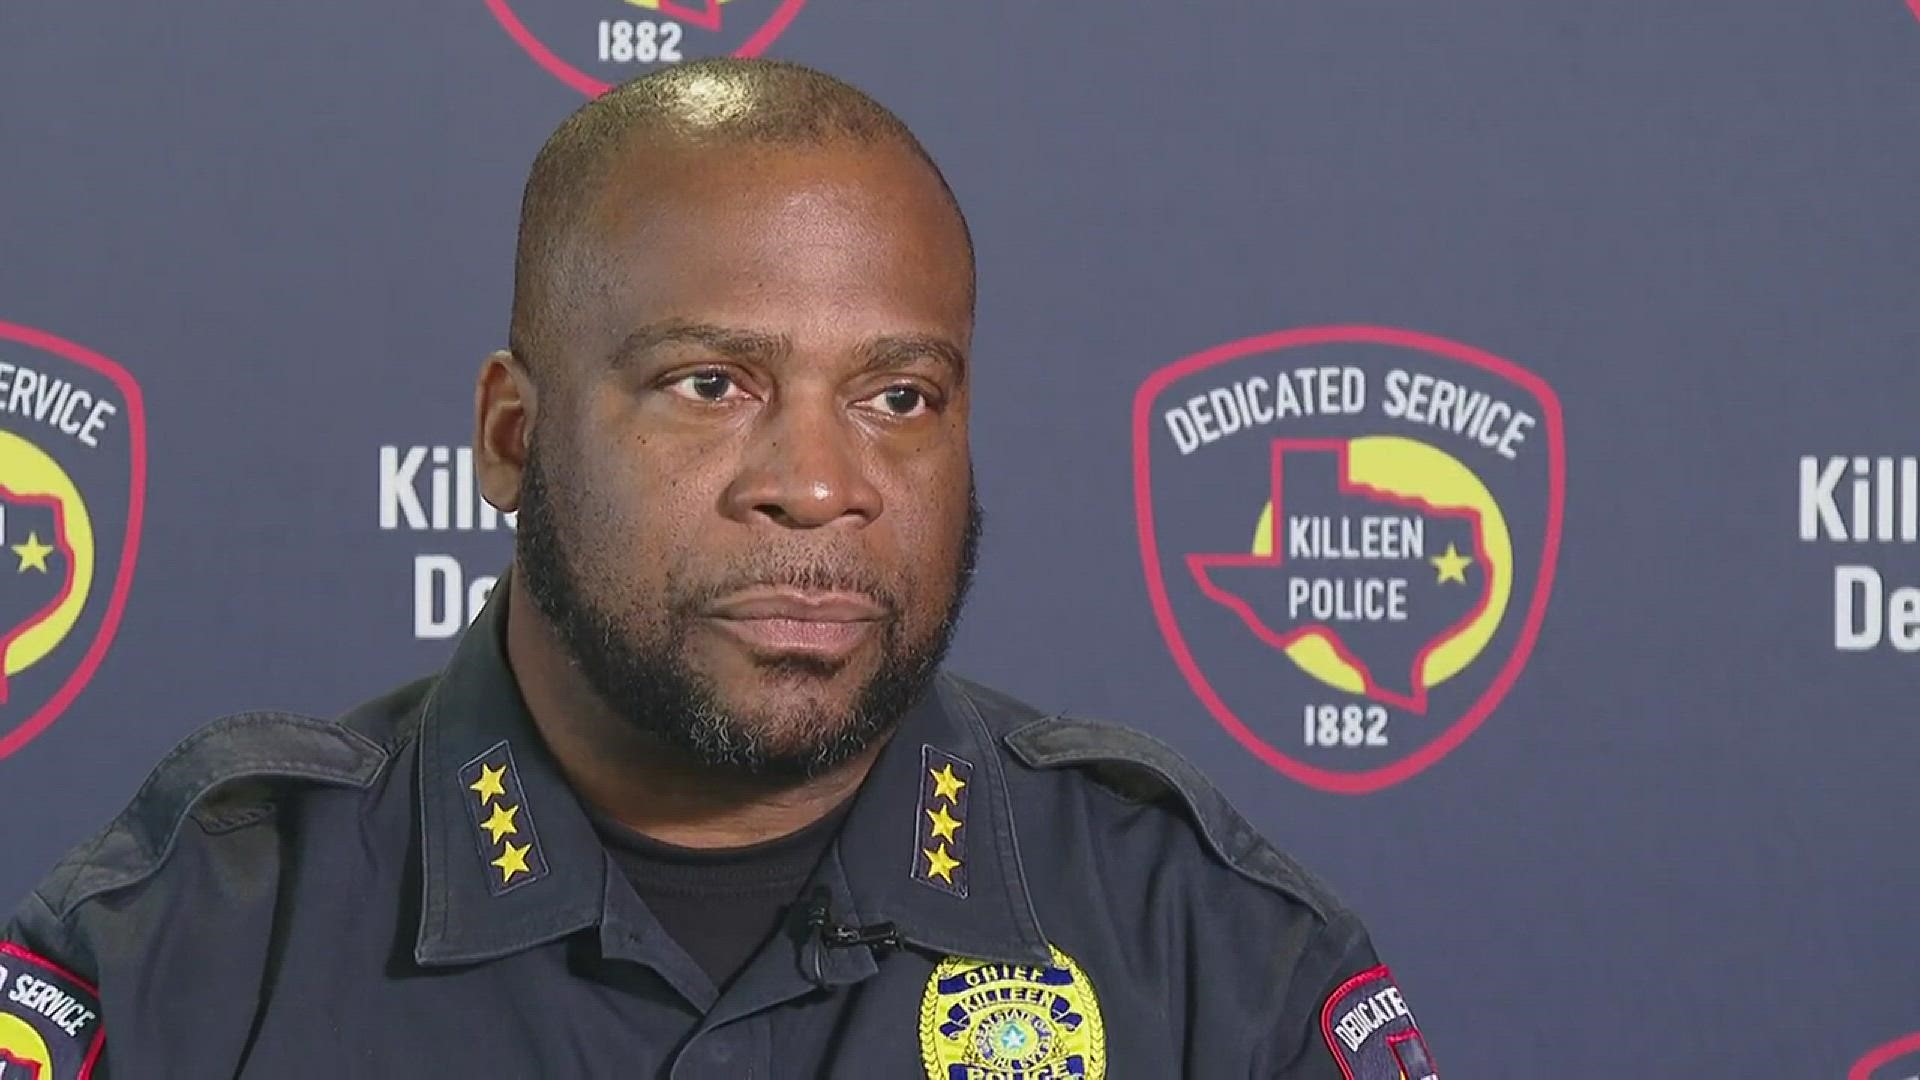 Killeen Police Chief Charles Kimble is set to retire on Jan. 27 after serving 31 years in law enforcement. He agreed to sit down with 6 News for an interview where